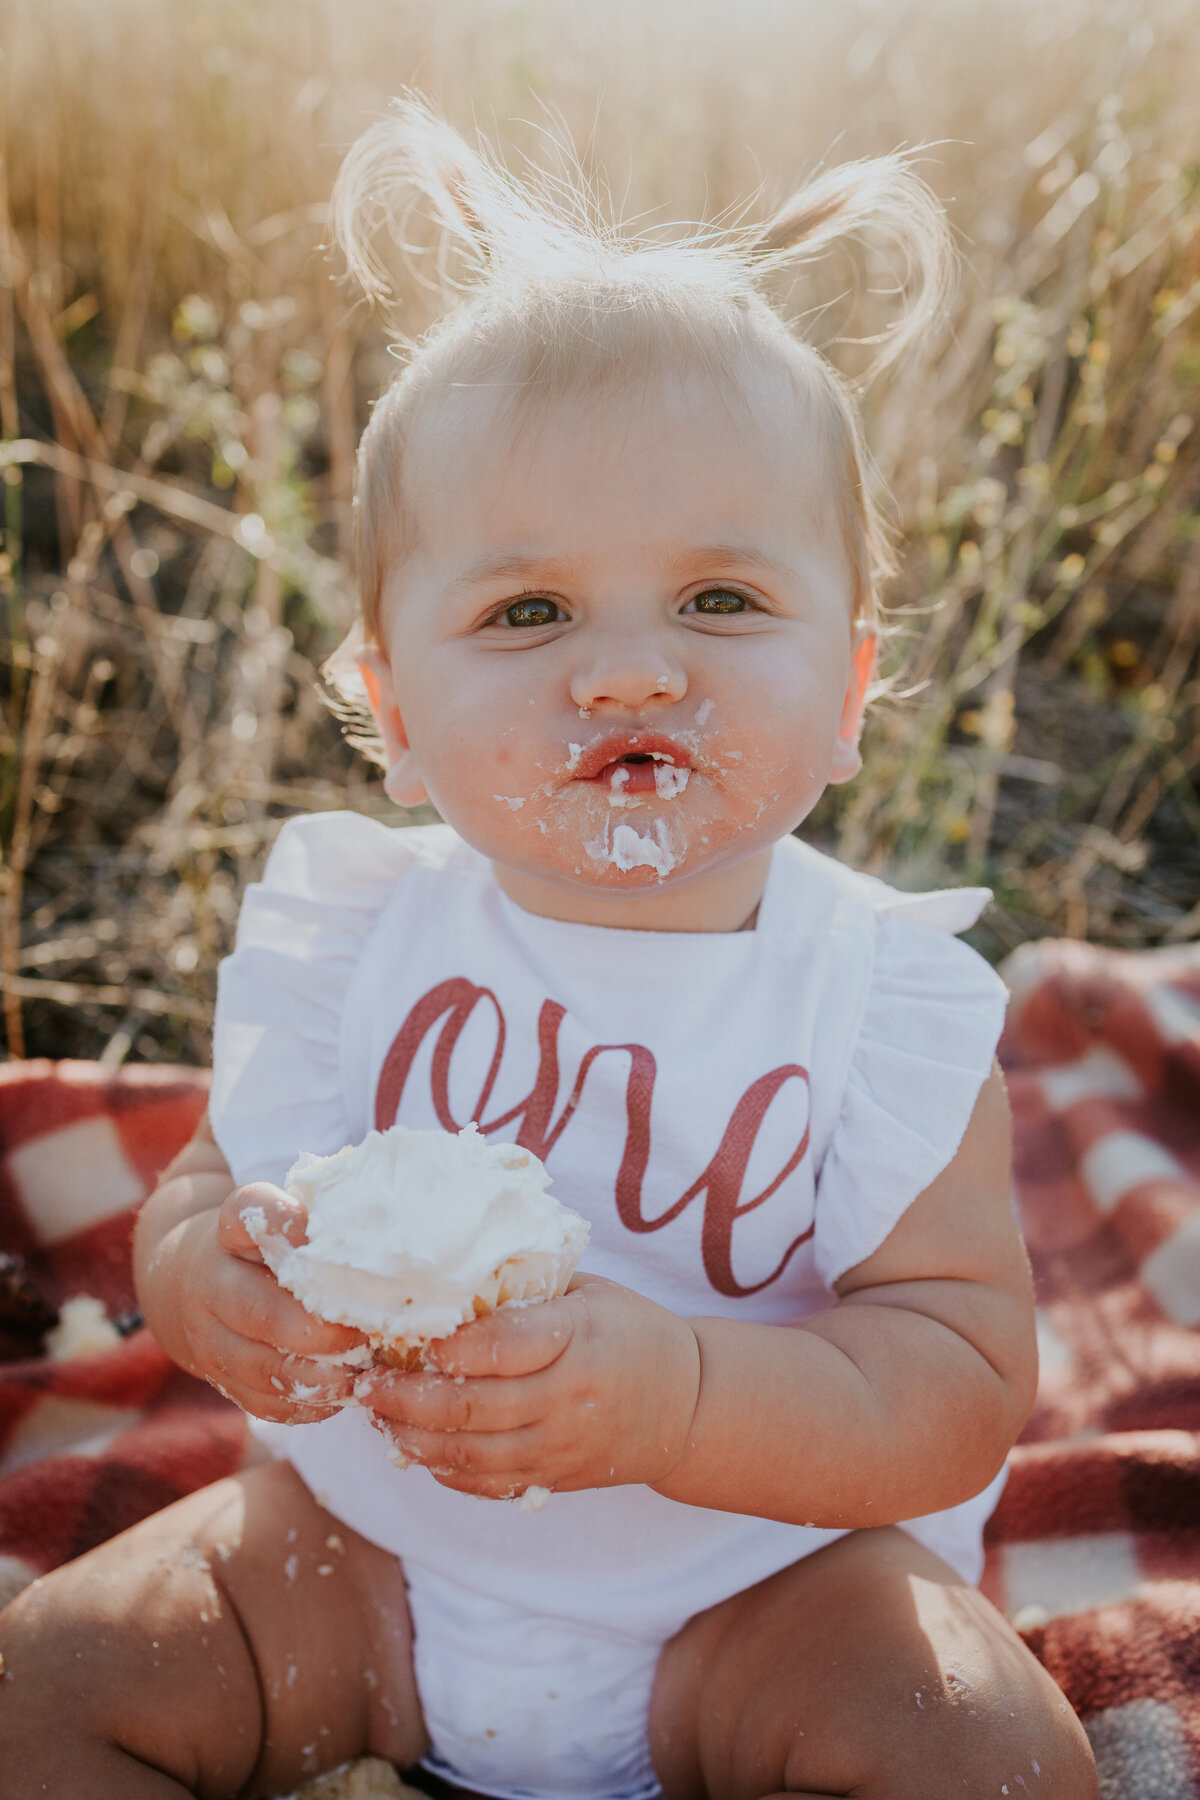 One year old girl gives camera a puzzled look as she hold a frosted cupcake.